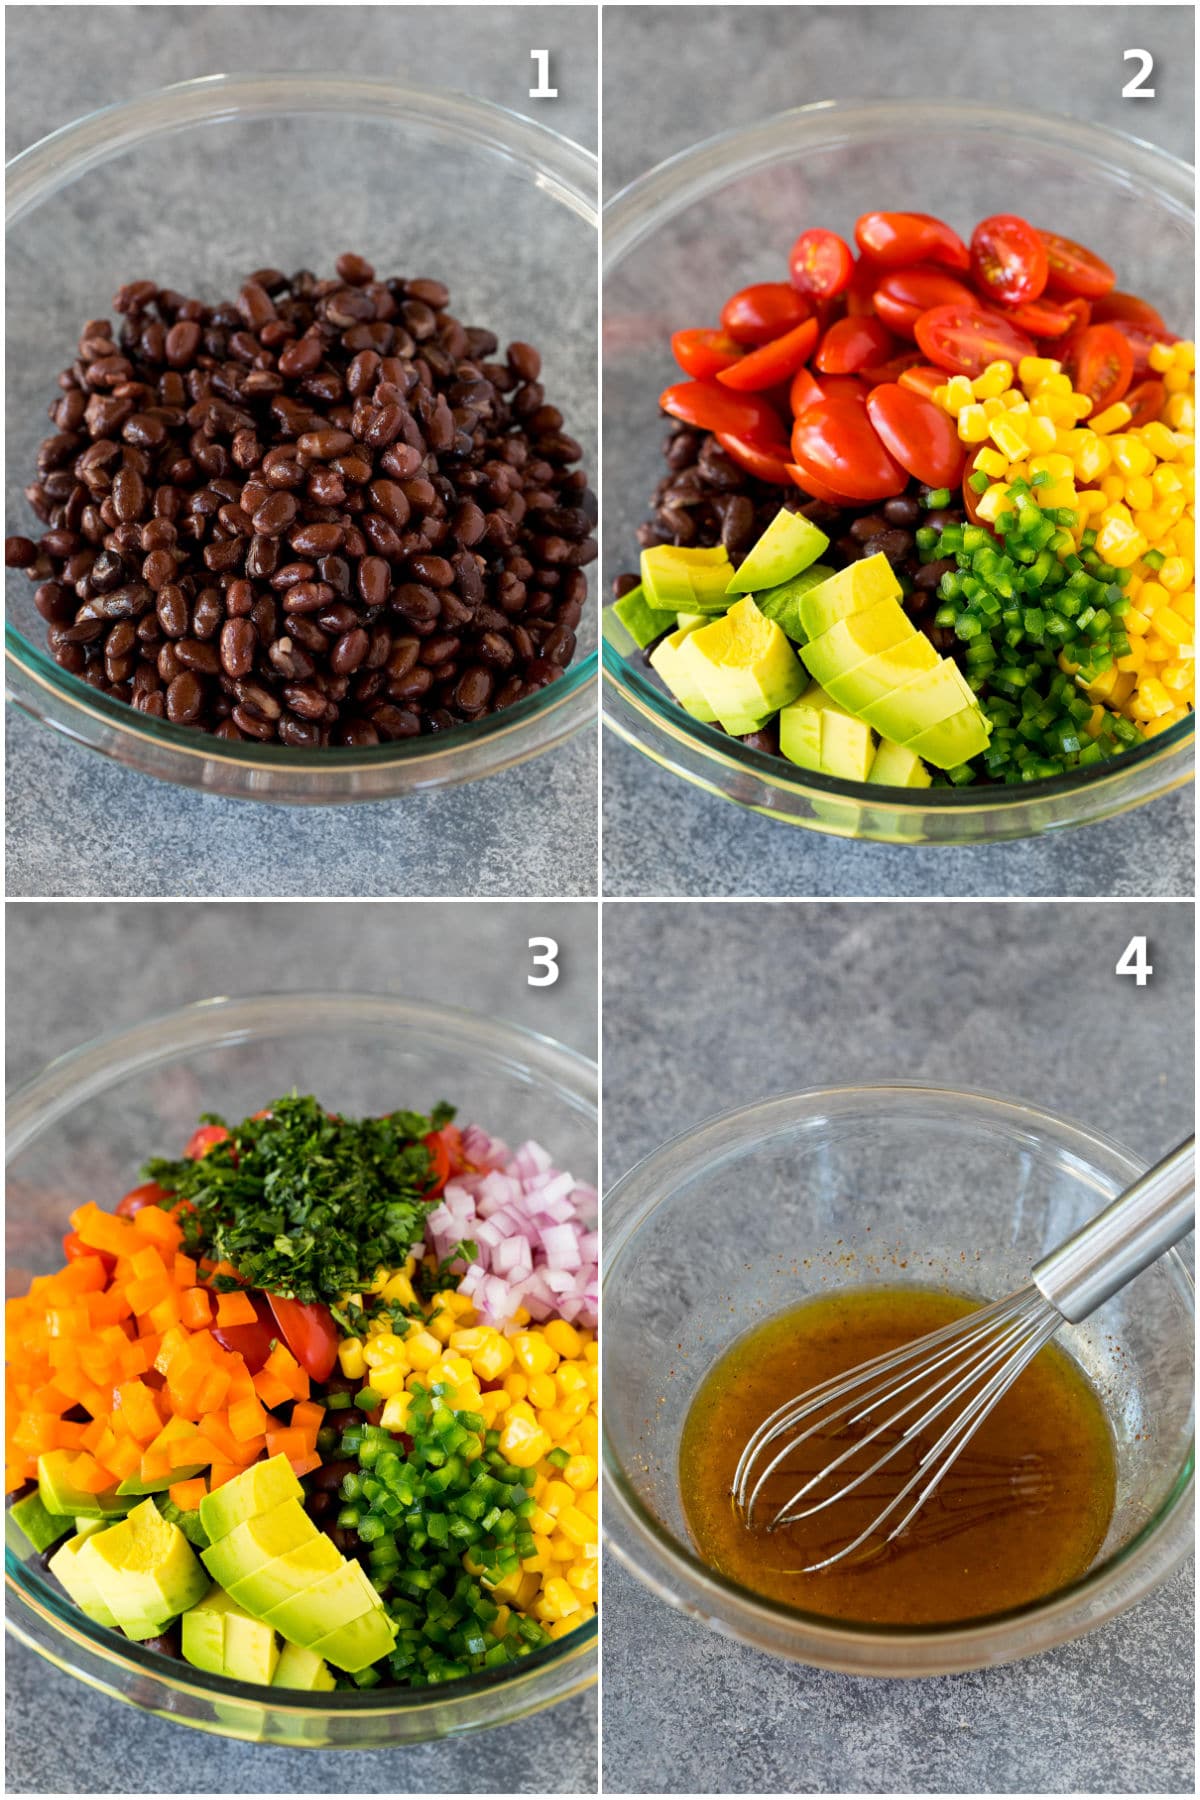 Step by step shots showing how to make black bean salad.